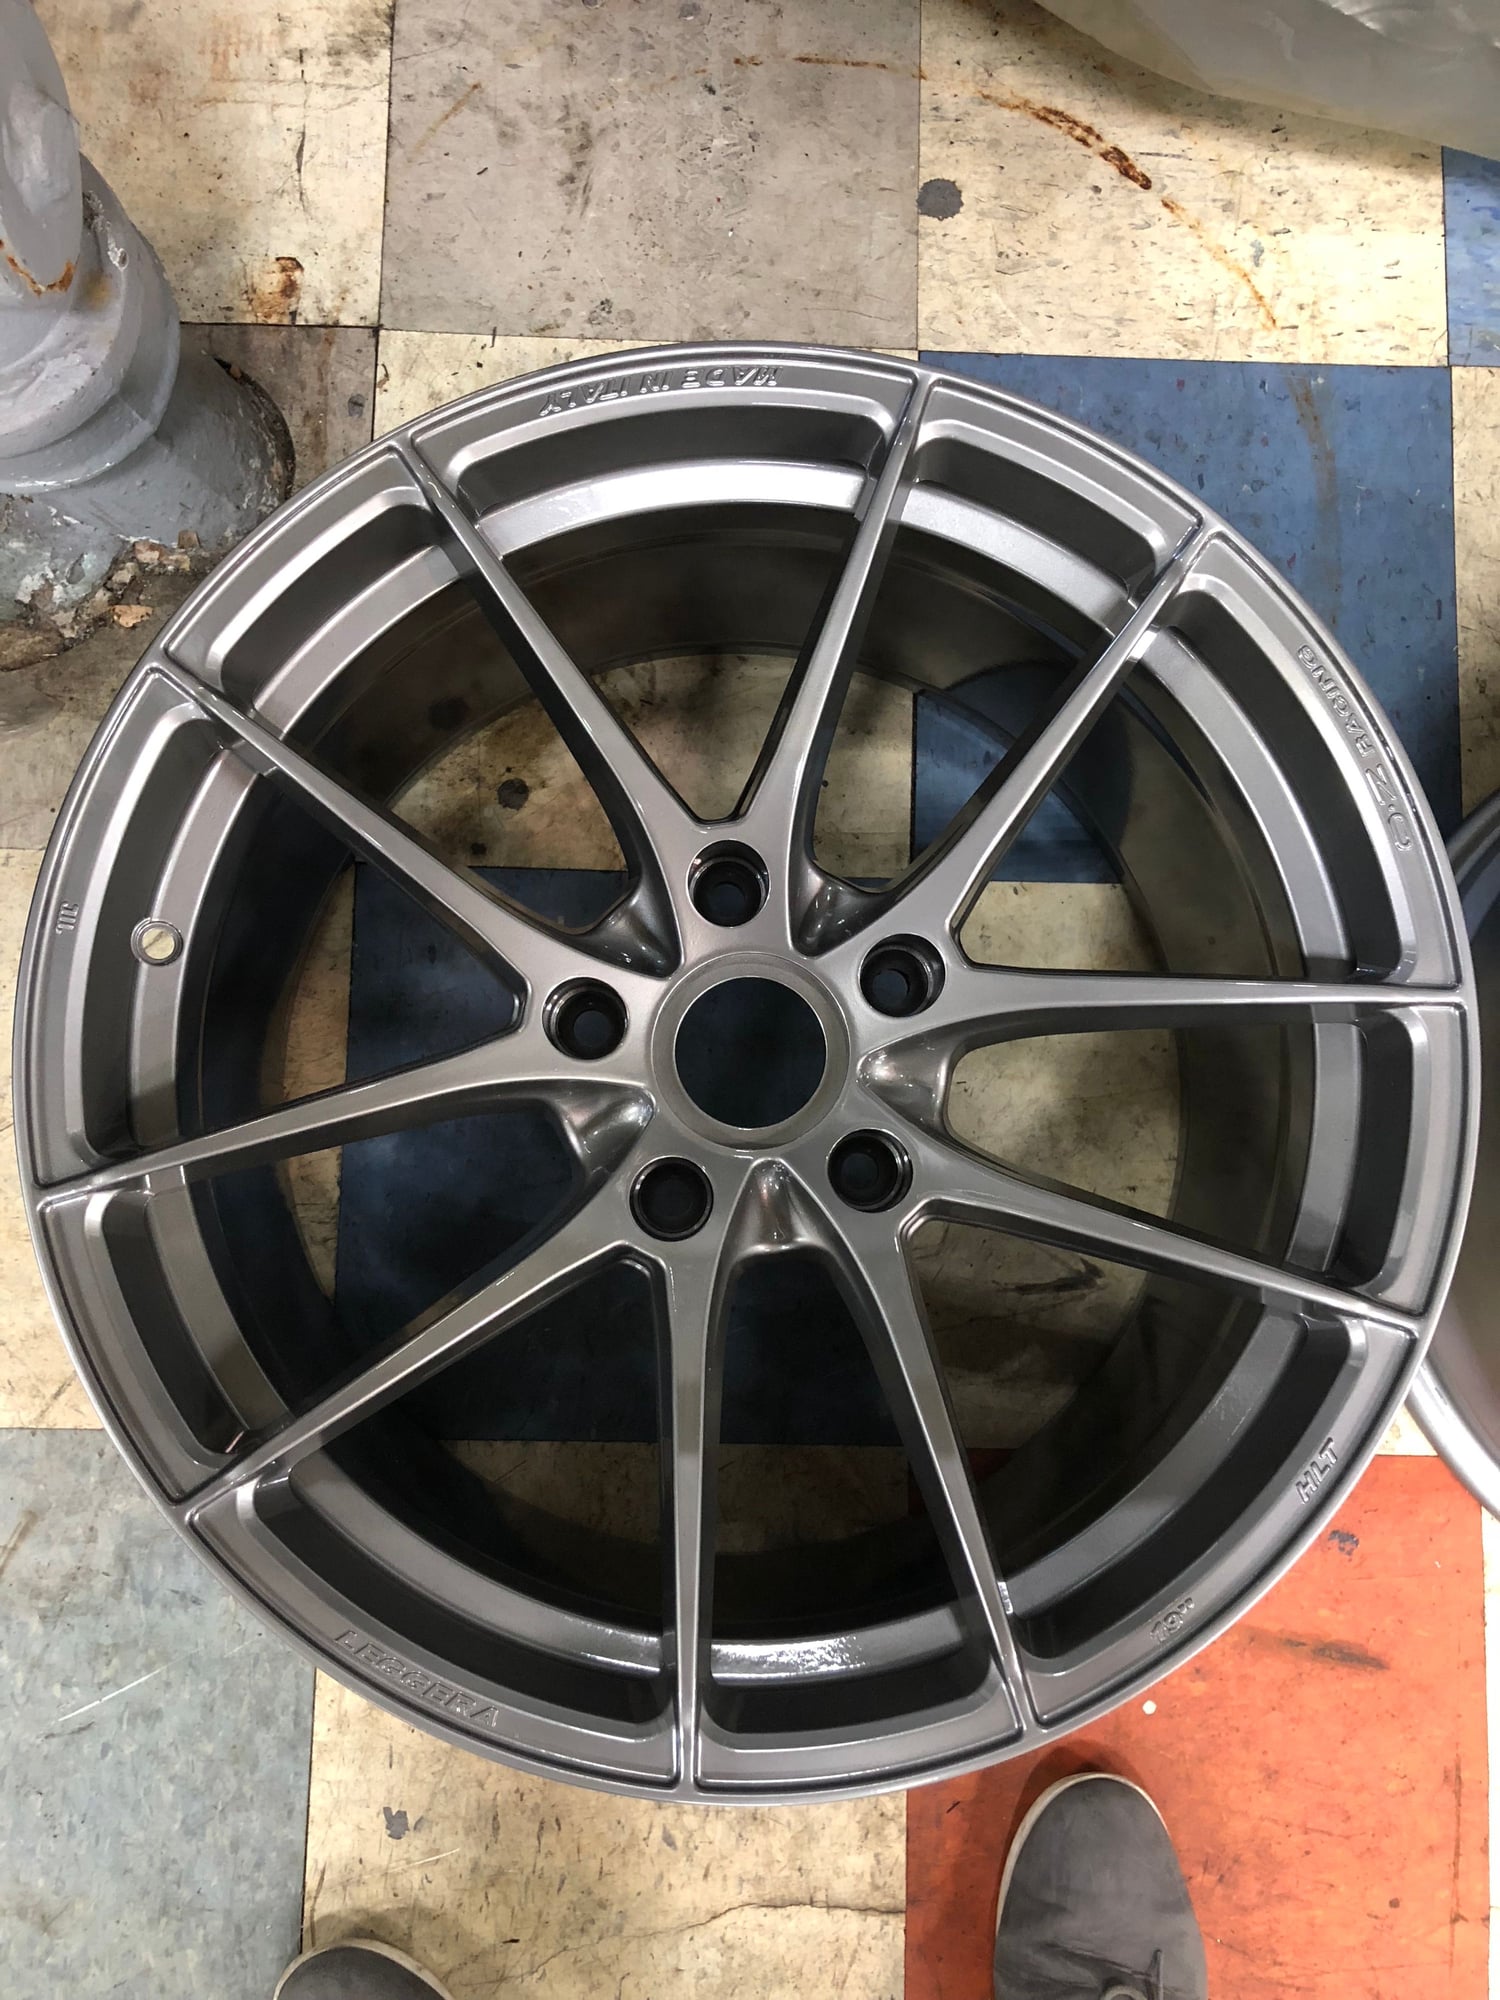 Wheels and Tires/Axles - OZ Leggera HLT Wheels (with used Pirelli Trofeo R tire) for Sale - Used - 2012 to 2016 Porsche 911 - East Rutherford, NJ 07073, United States